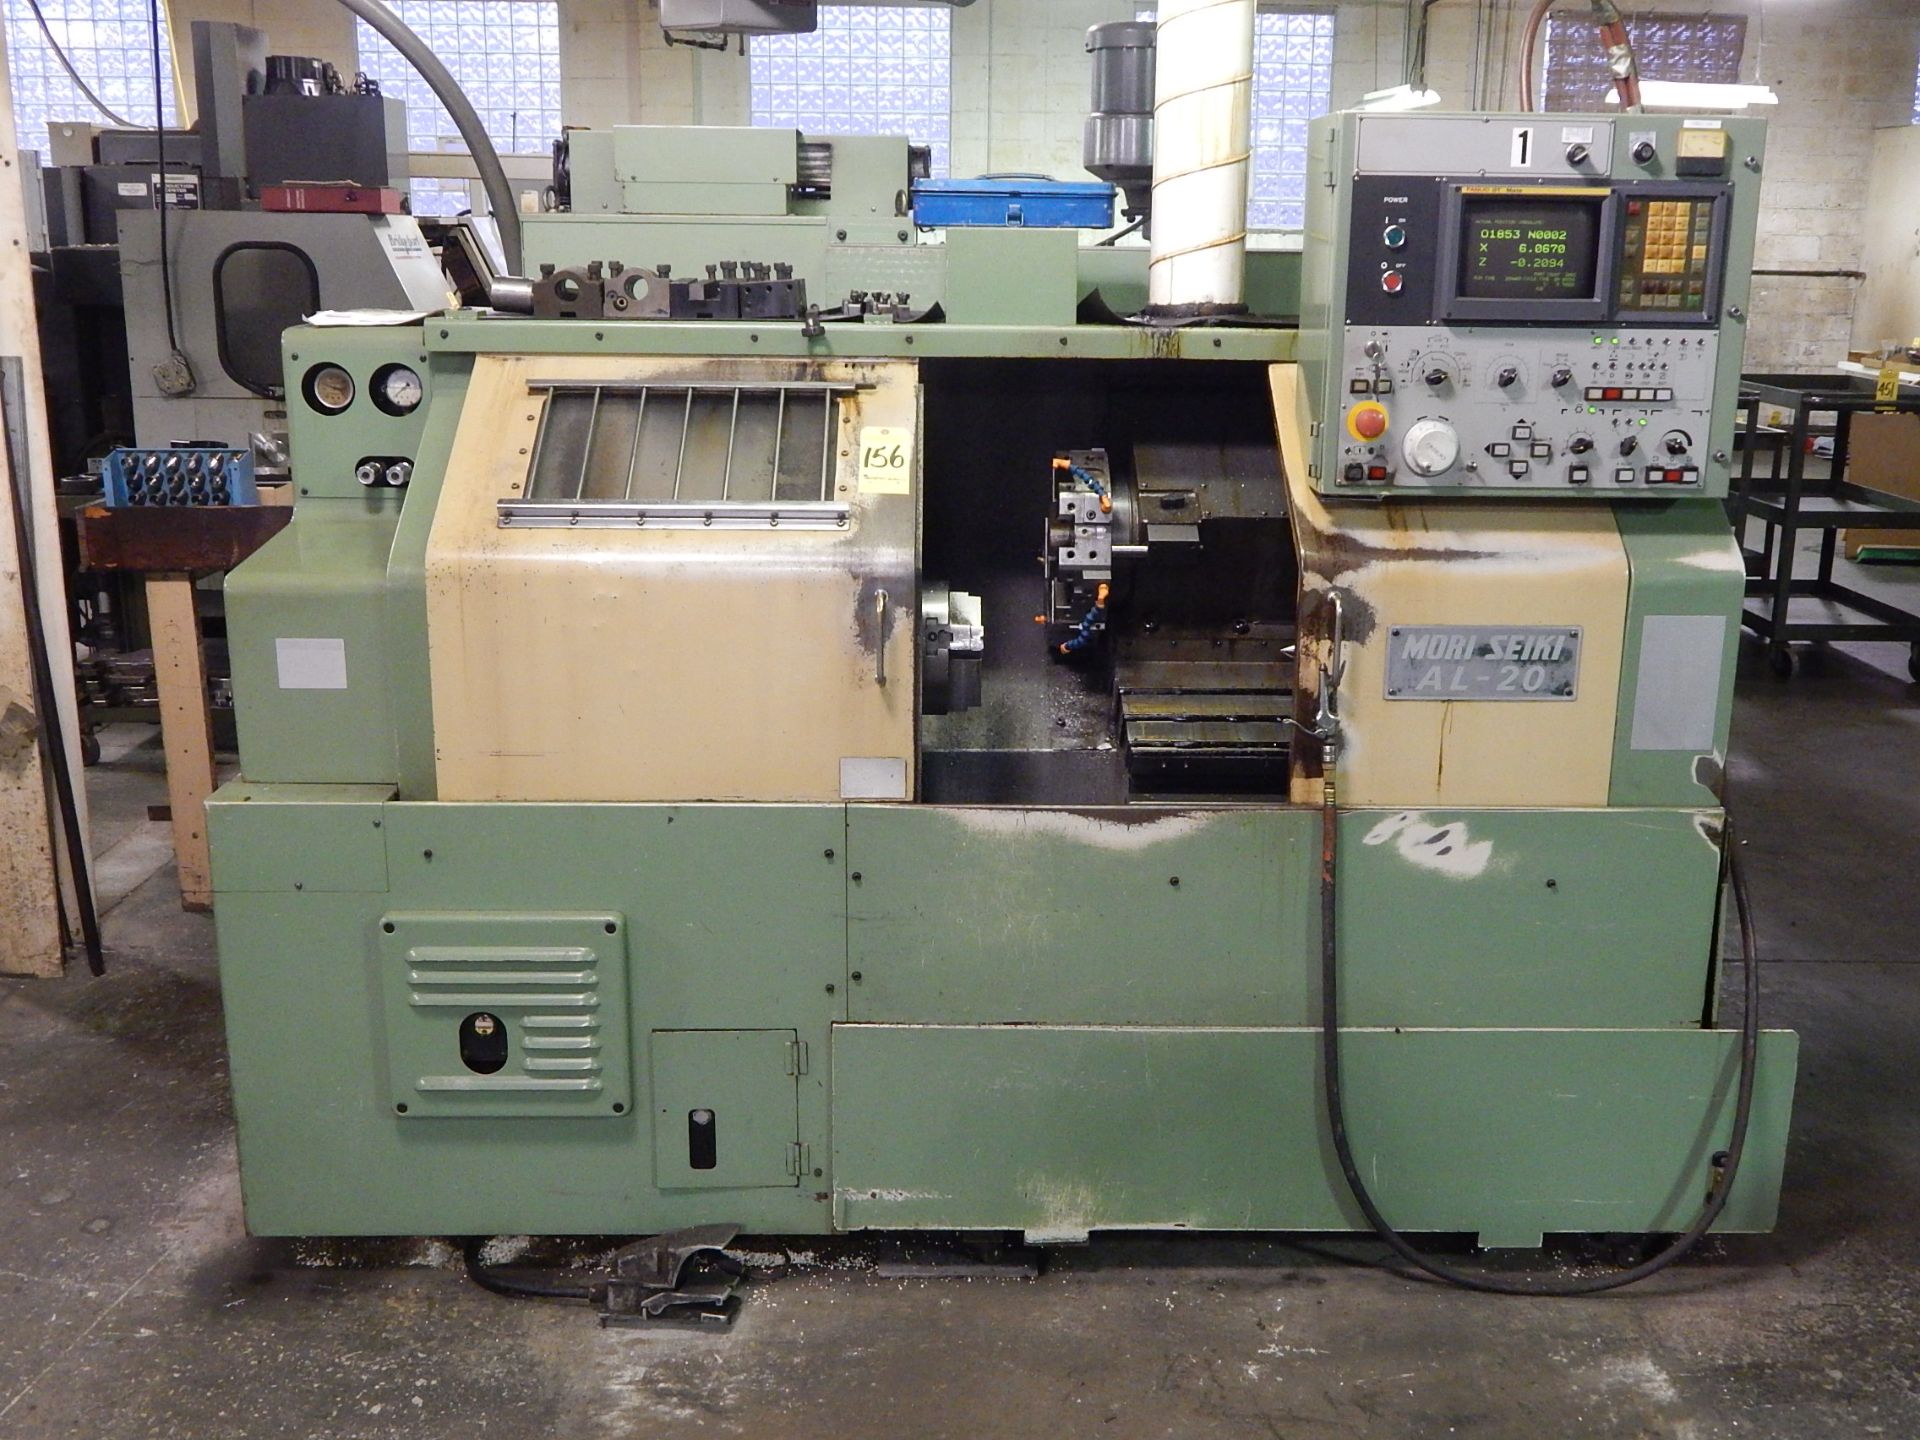 Mori-Seiki AL-20, CNC Turning Center, s/n 2796, 8 In. 3-Jaw Chuck, 8 Station Turret, Tailstock, - Image 2 of 12